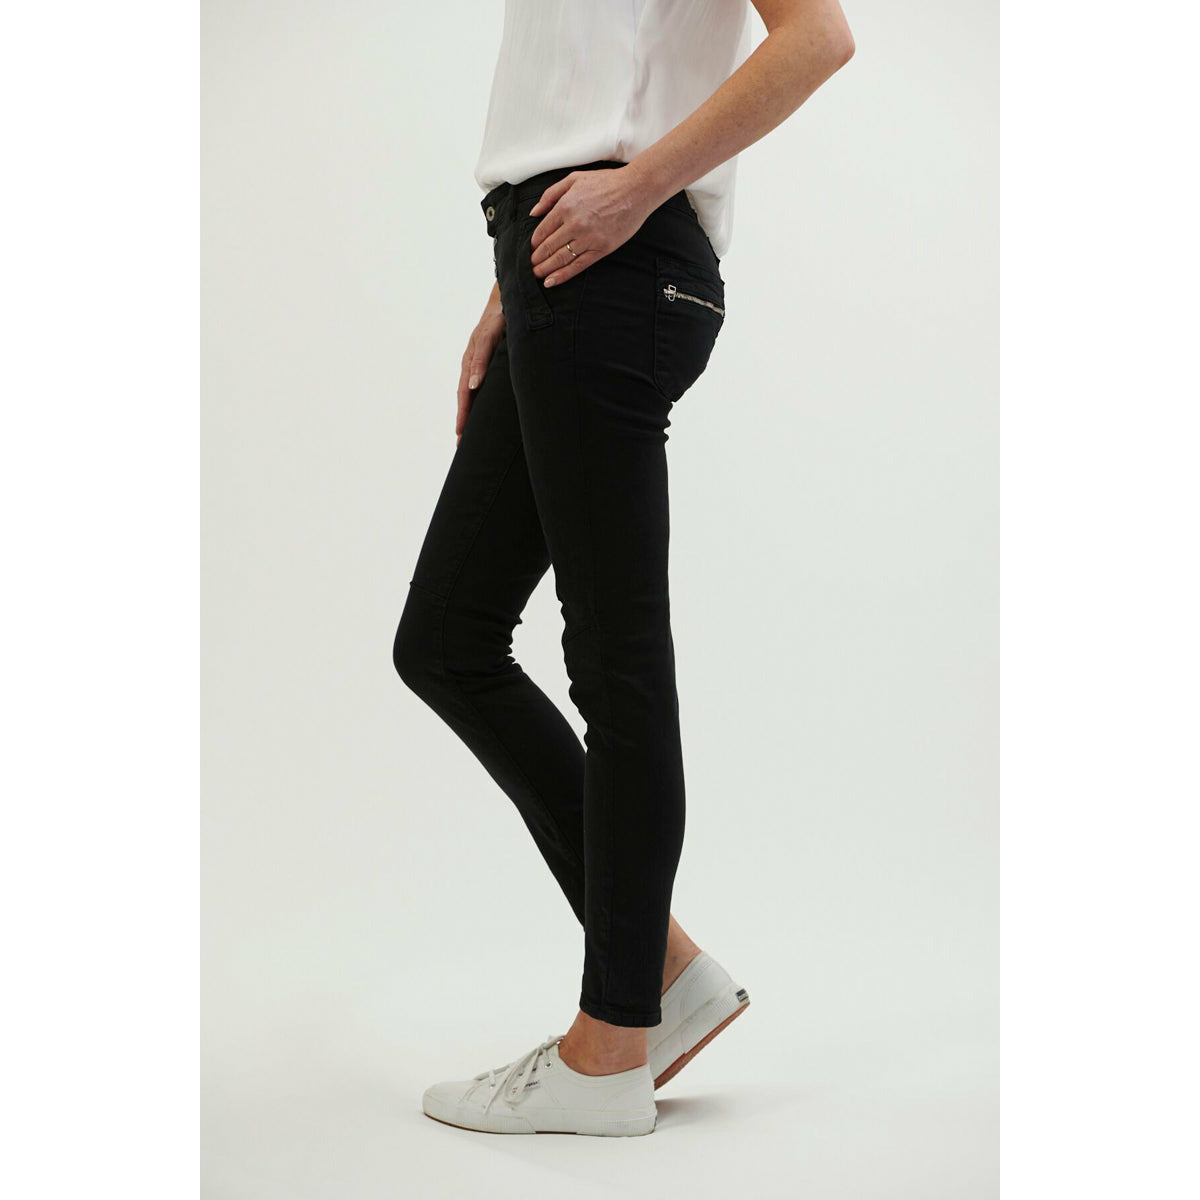 Piazza Italia Slim Fit High Waist Casual Jeans For Women - Black